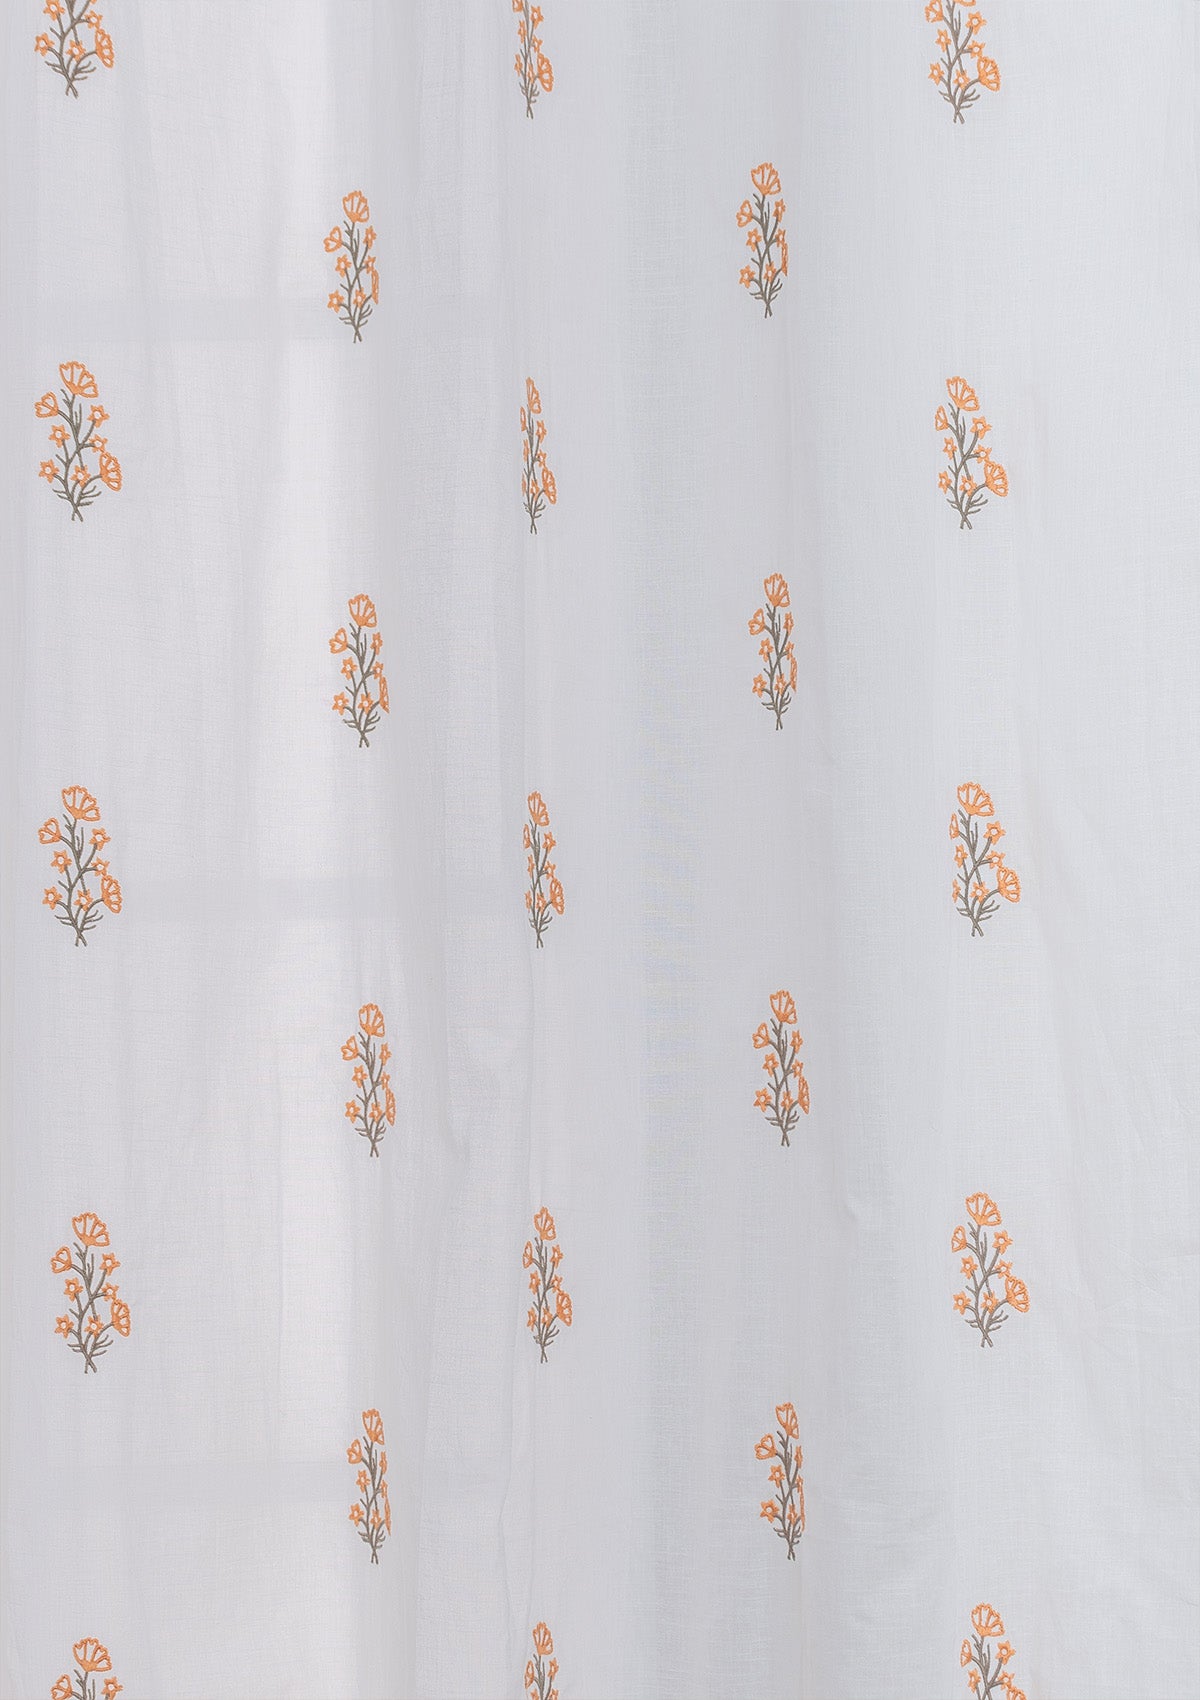 Spring 100% cotton embroidered floral sheer curtain for living room - Light filtering - Orange - Single - Pack of 1